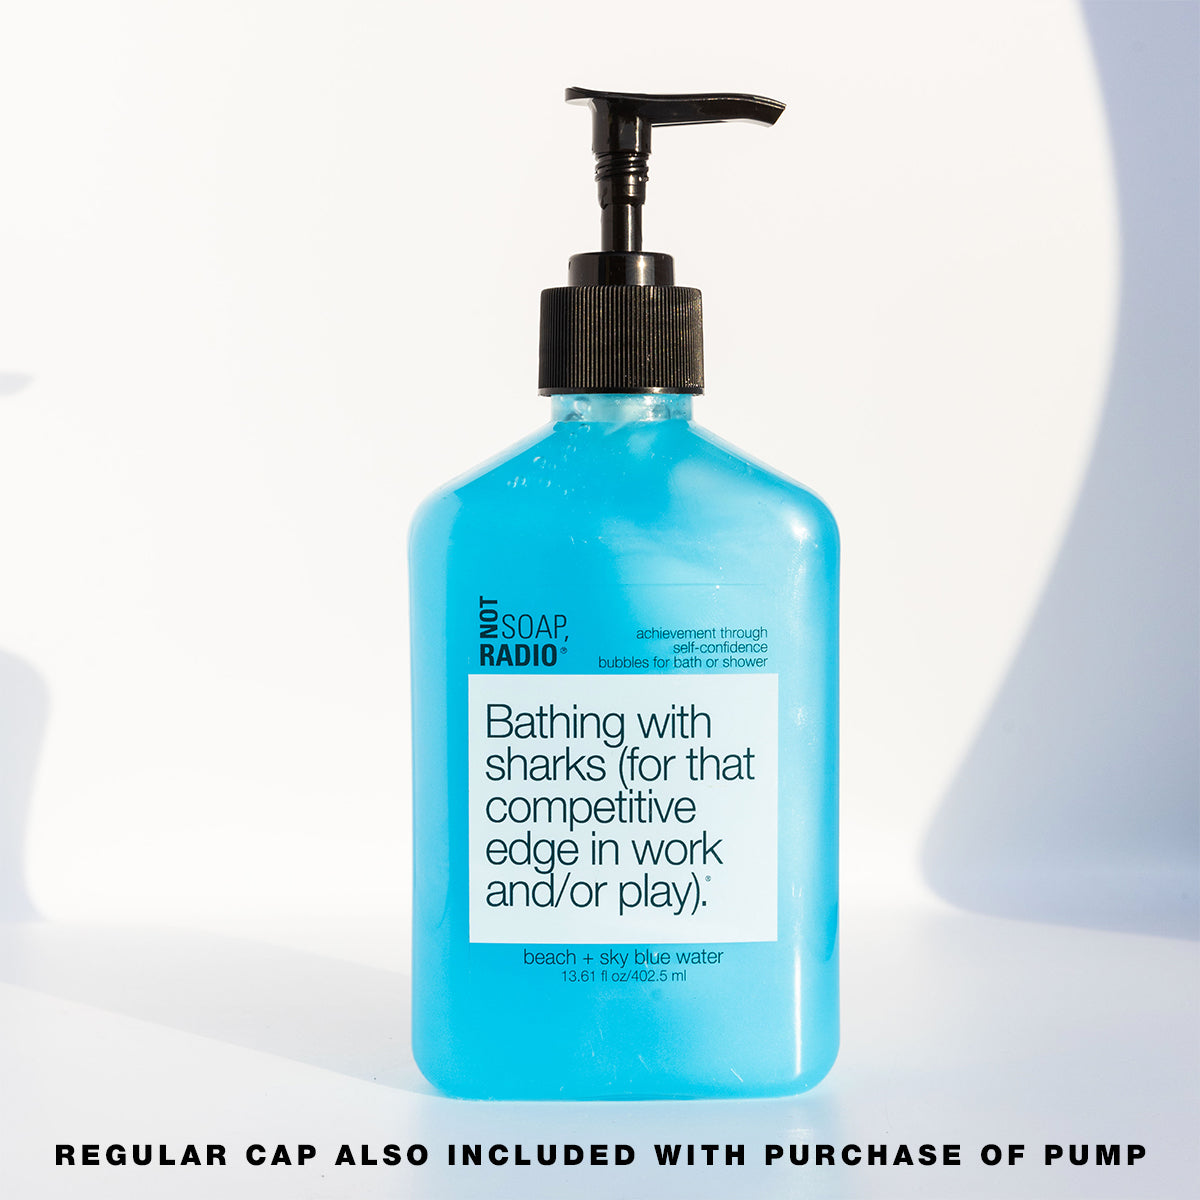 A self-confidence based shower gel featuring a pump option for the bottle upon purchase.